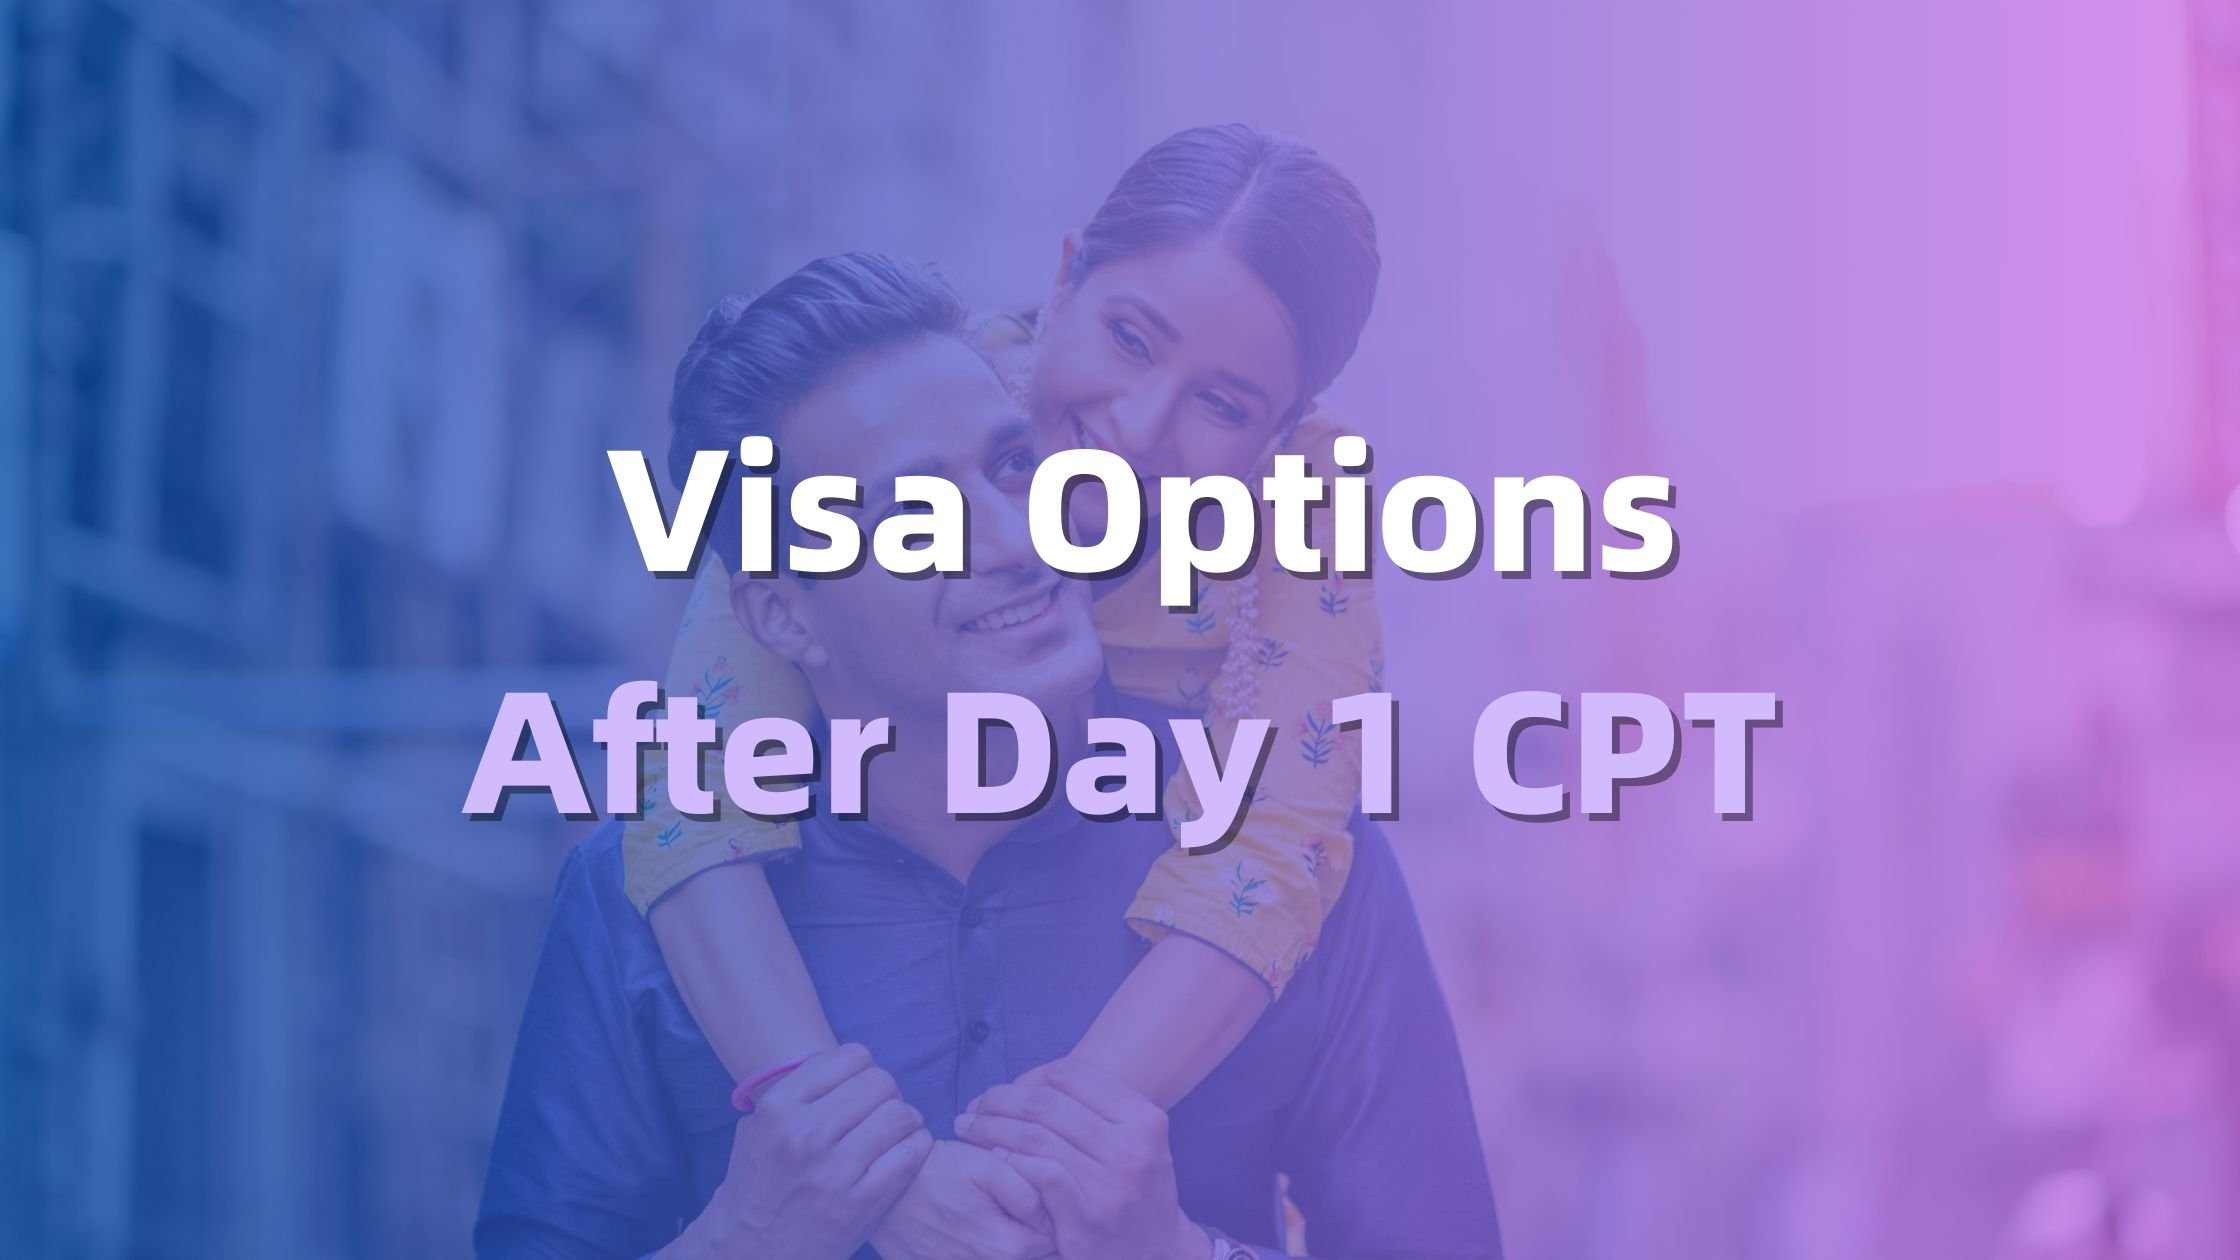 Visa Options After Day 1 CPT